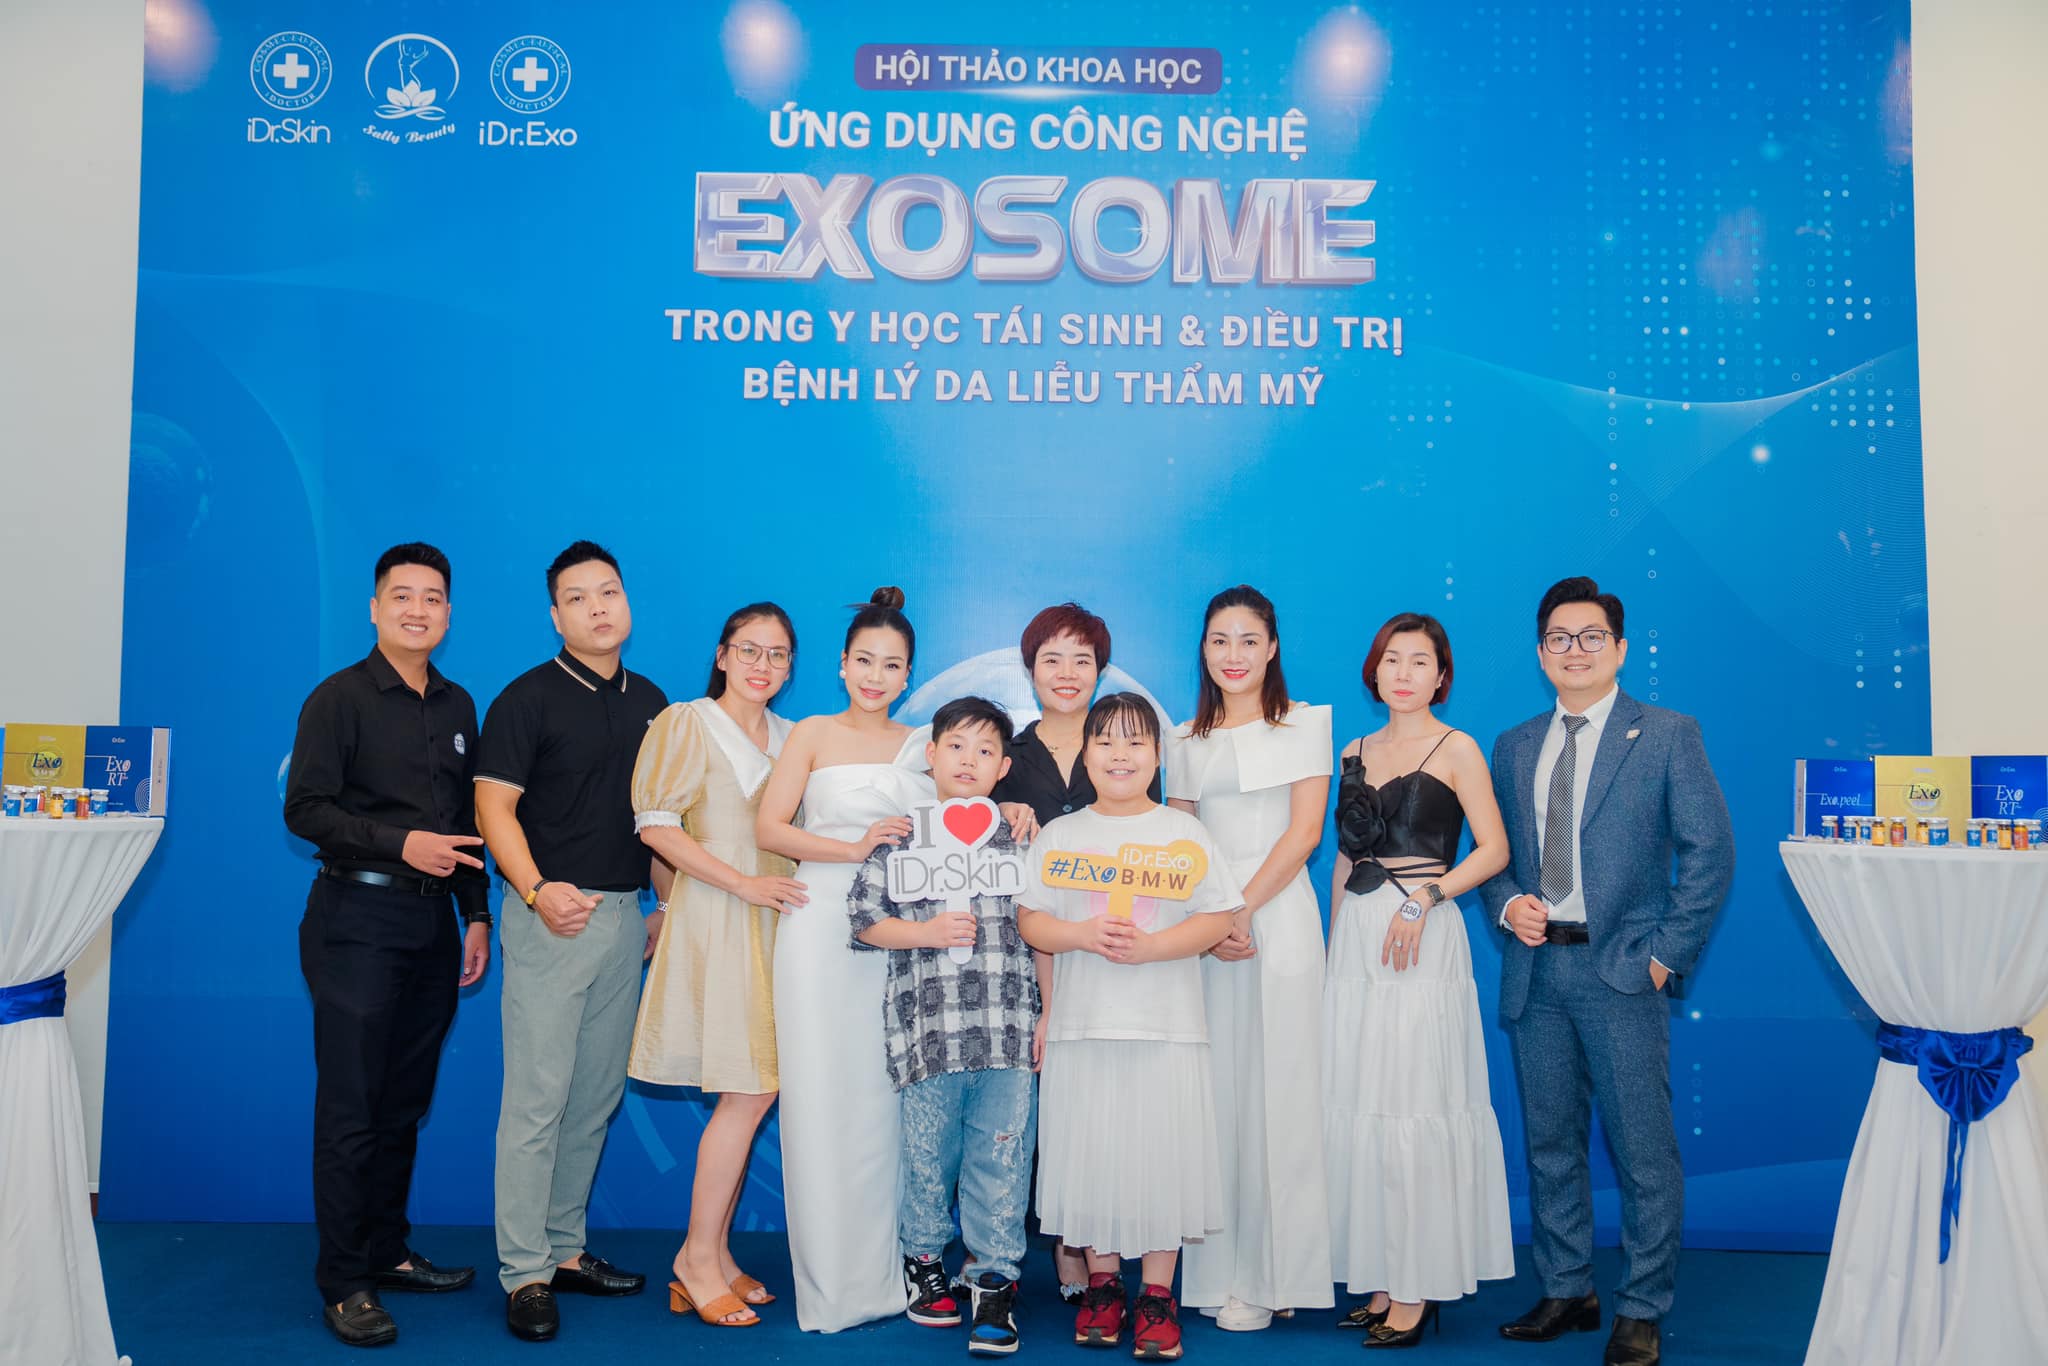 hoi-thao-khoa-hoc-ung-dung-cong-nghe-exosome